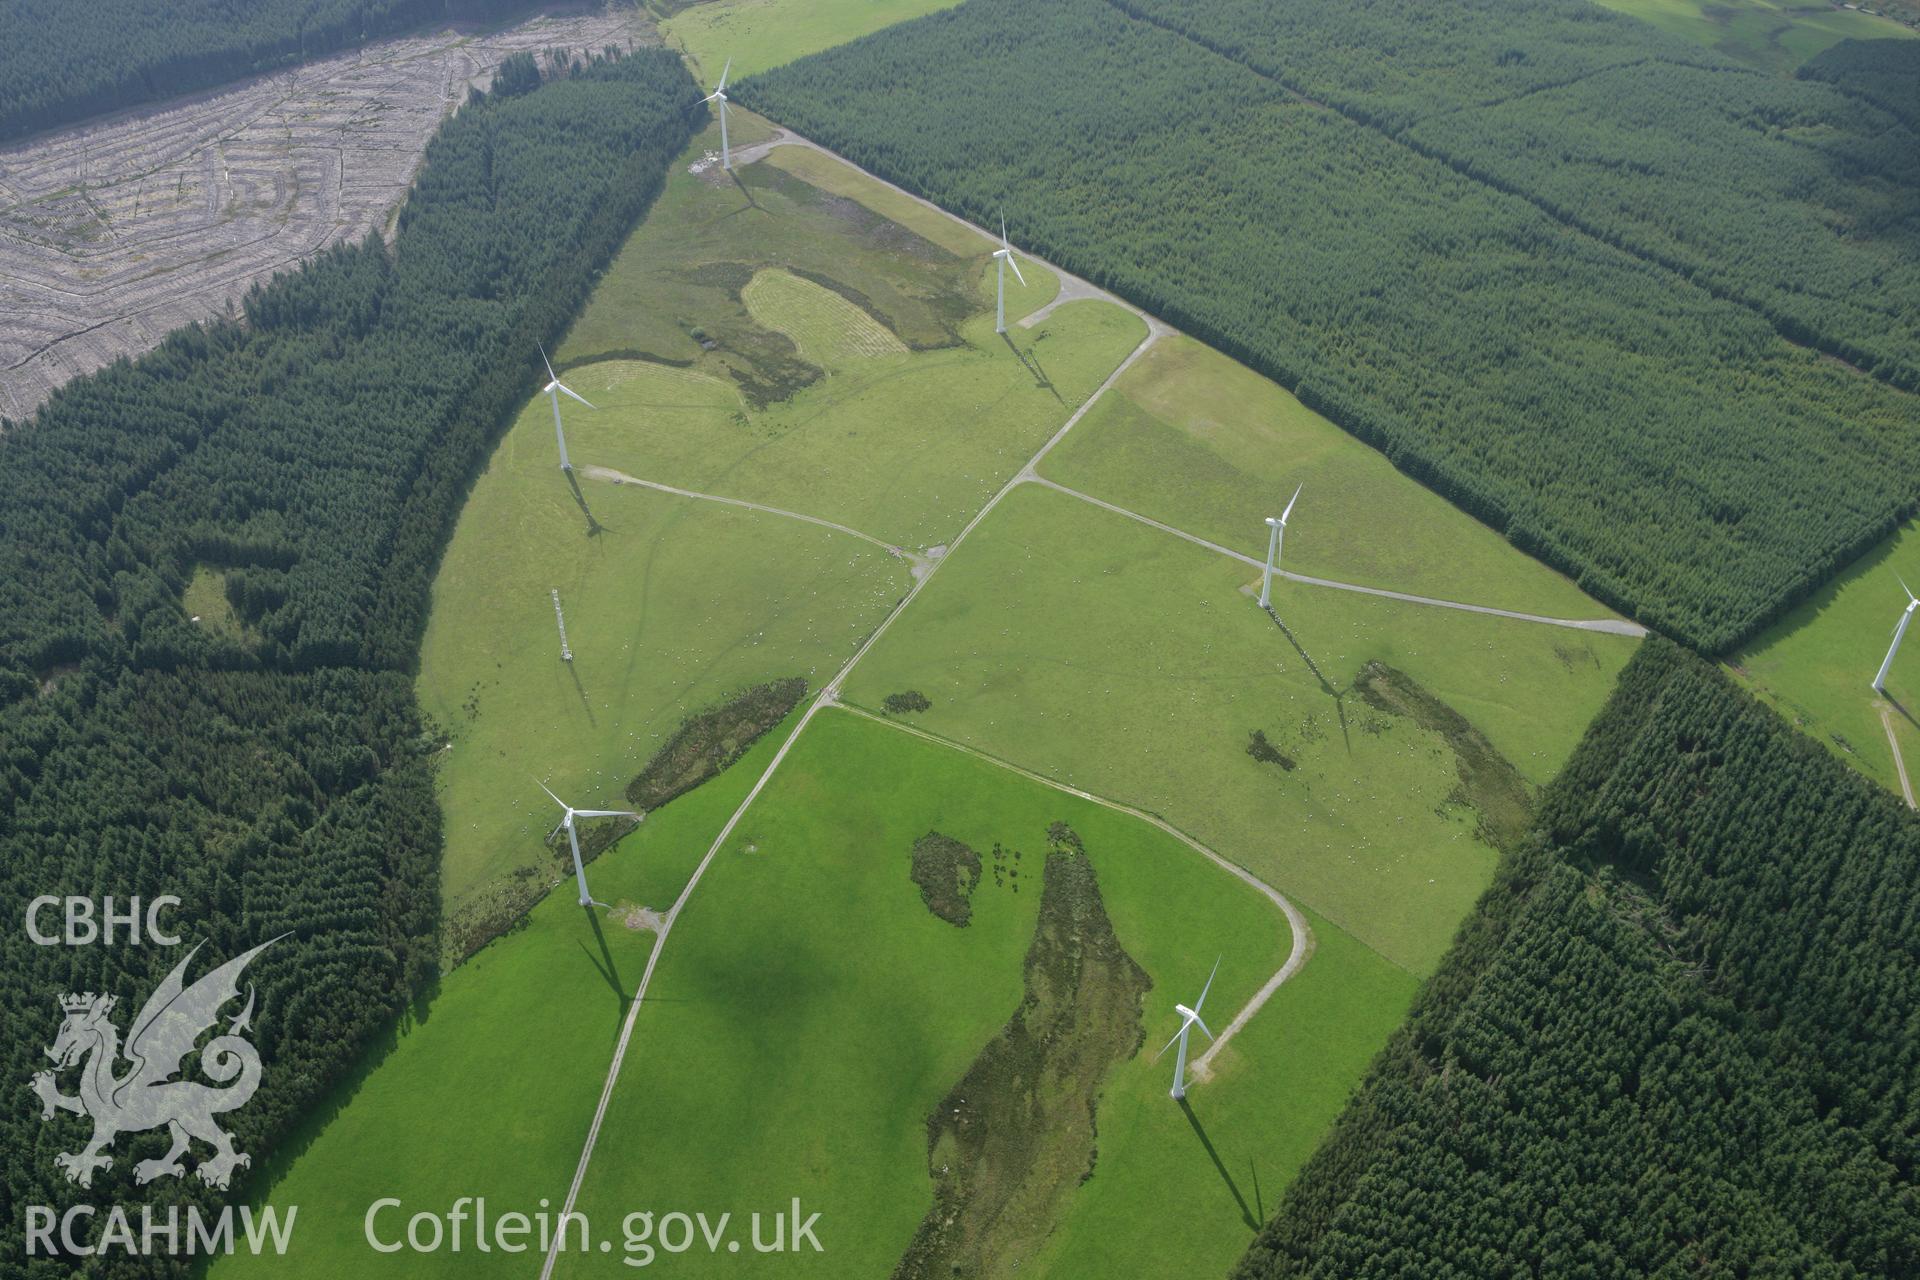 RCAHMW colour oblique aerial photograph of Tir Mostyn Windfarm. Taken on 31 July 2007 by Toby Driver